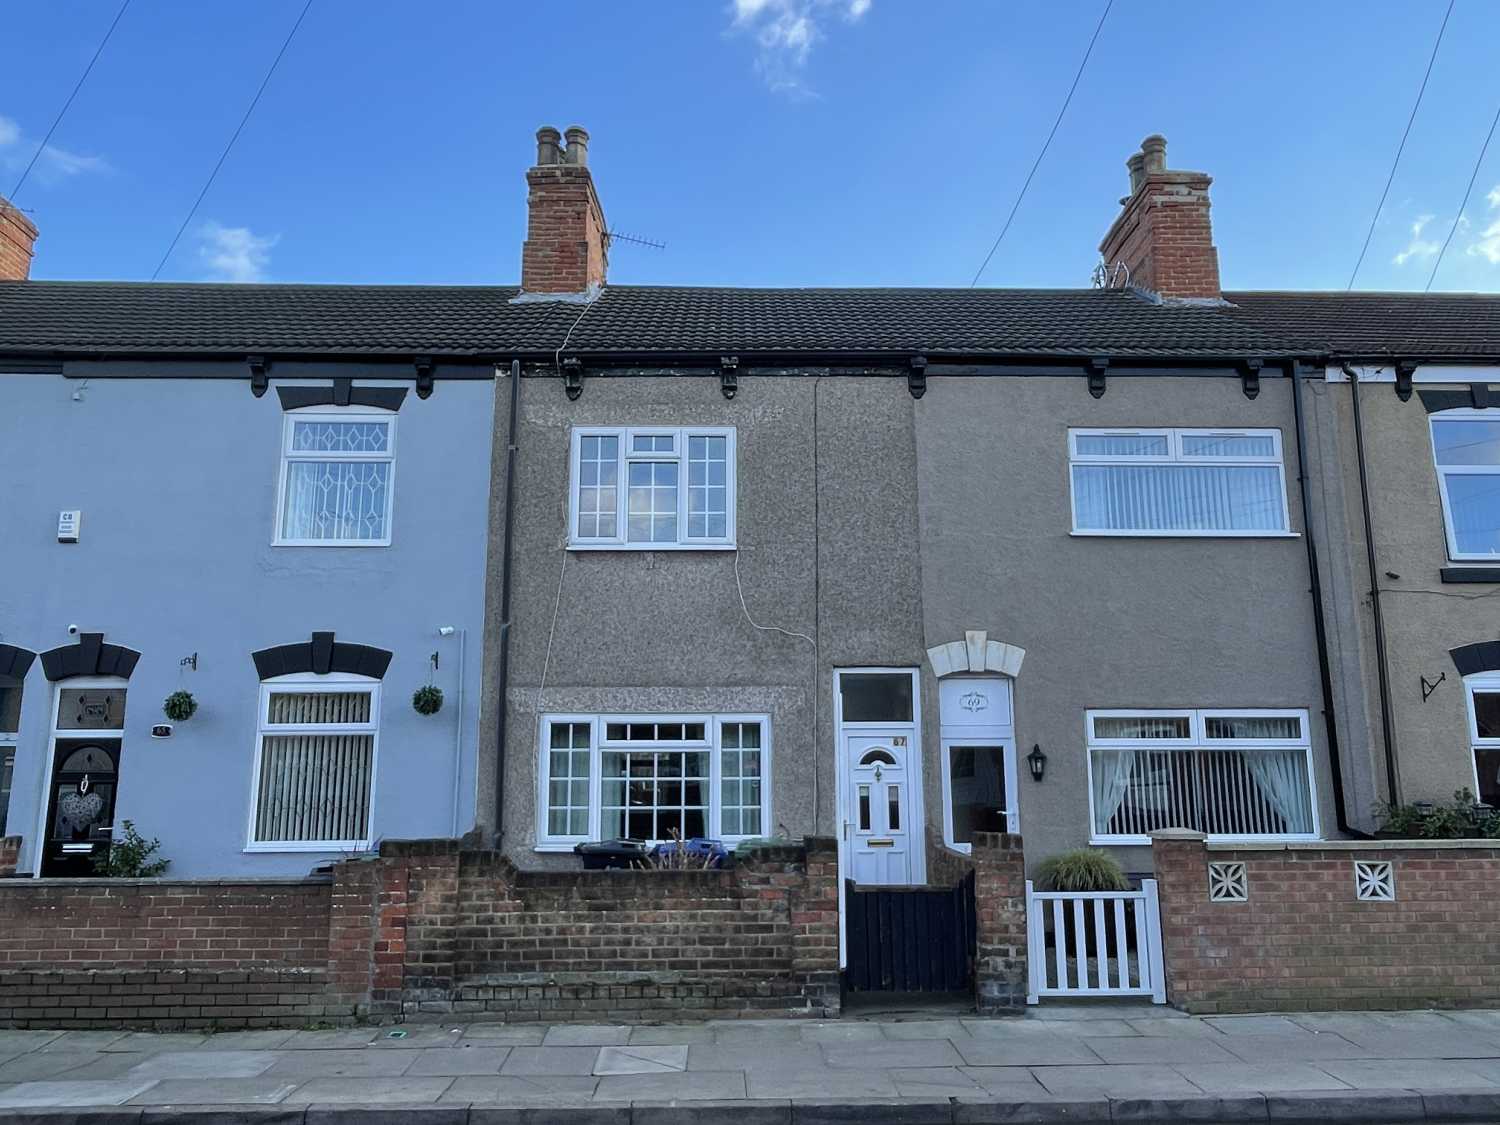 Three-bed terrace house, Grimsby, £10,000